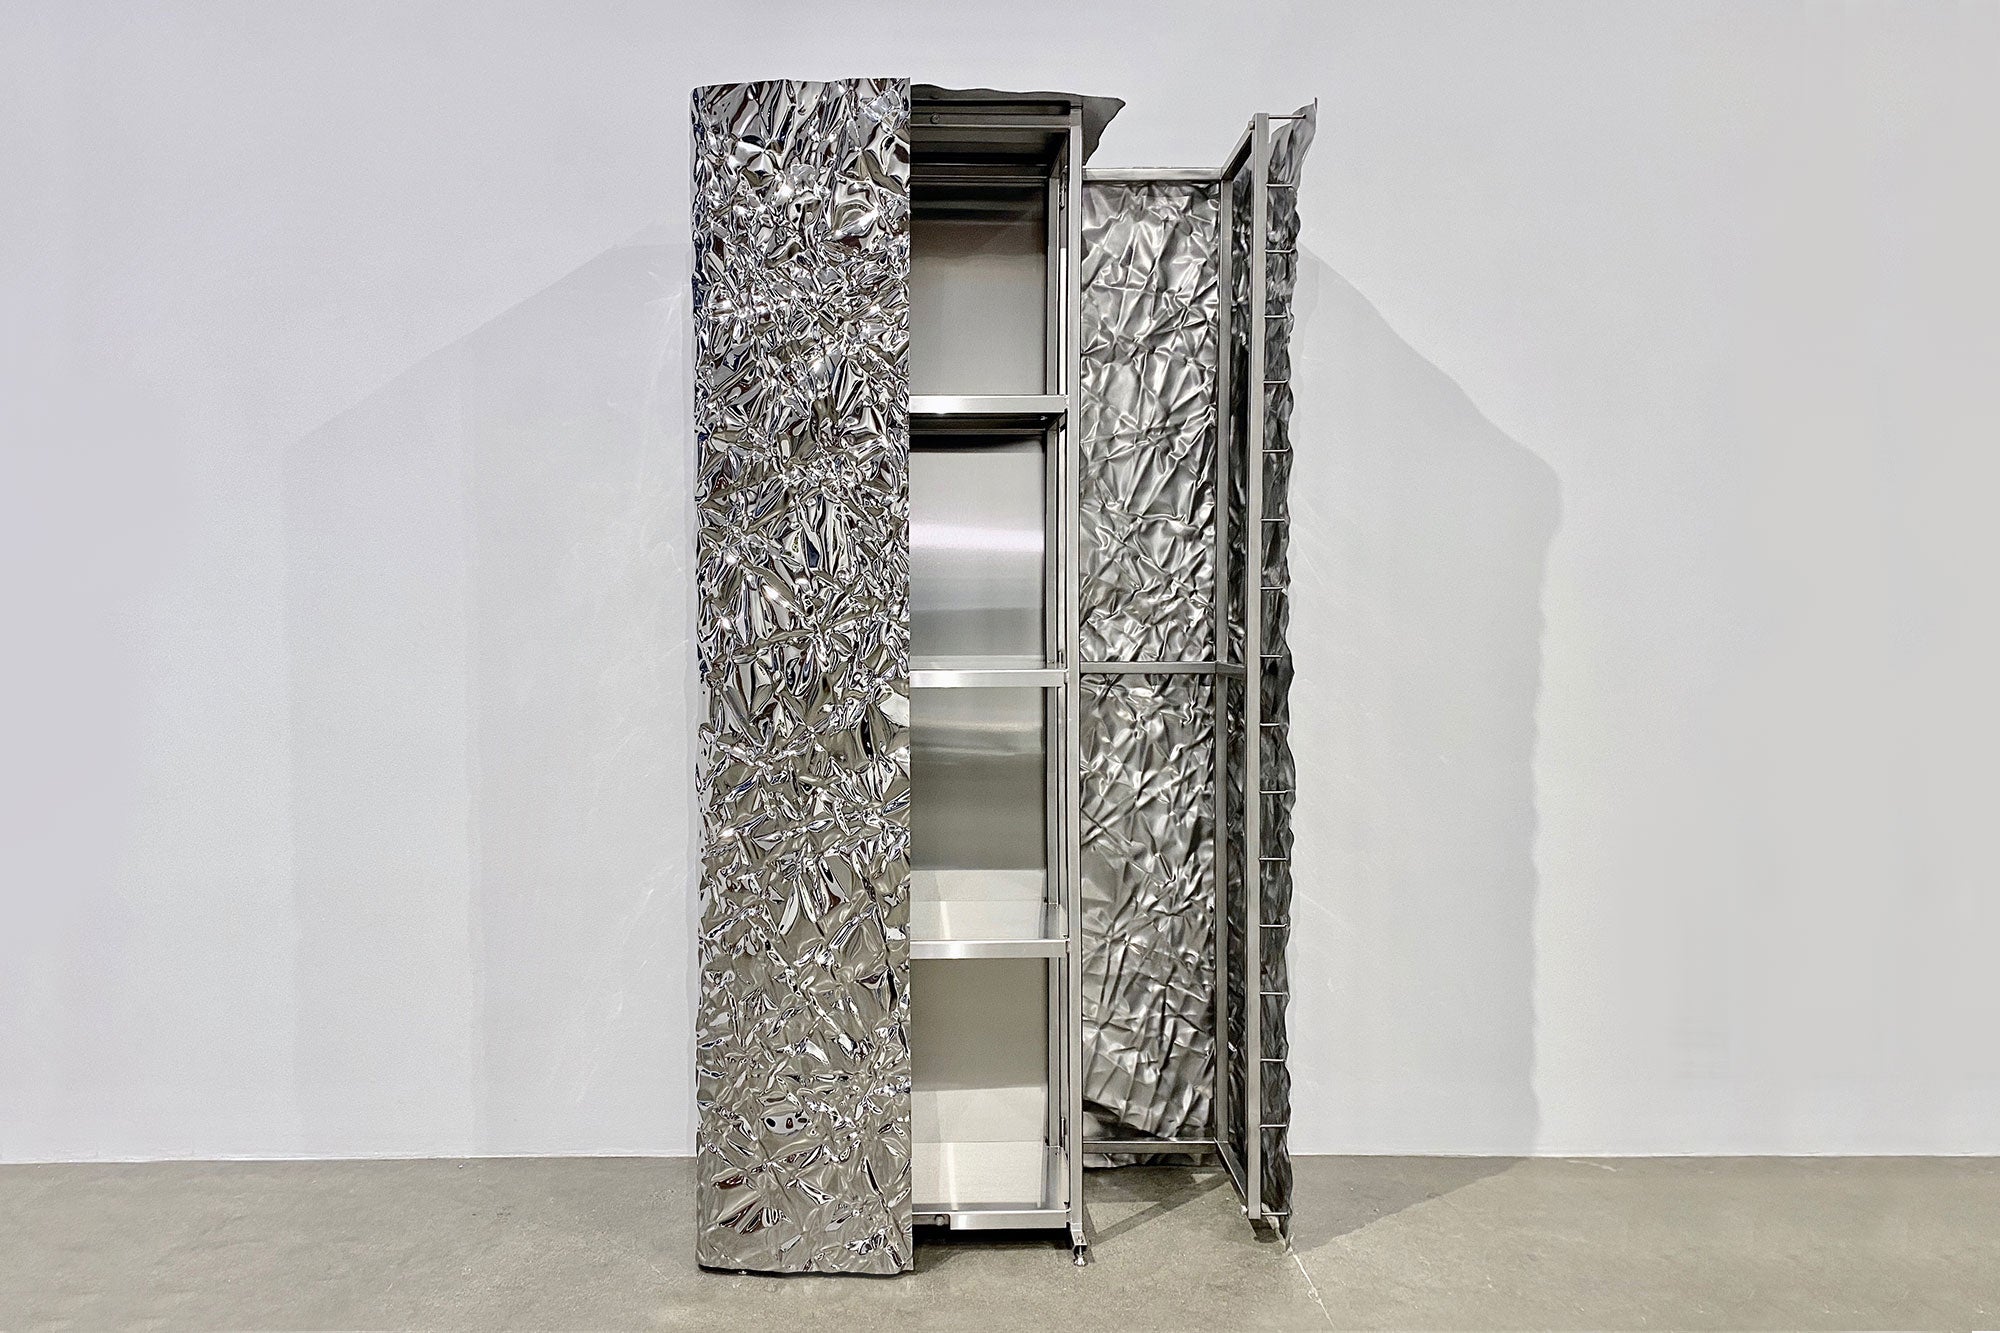 Stunning wrinkled steel cabinet with mirror polished plating and interior shelving by Omaha-based designer Christopher Prinz. Made to order with a lead time of 10-12 weeks. Available in a range of raw and polished finishes. Please note that pieces